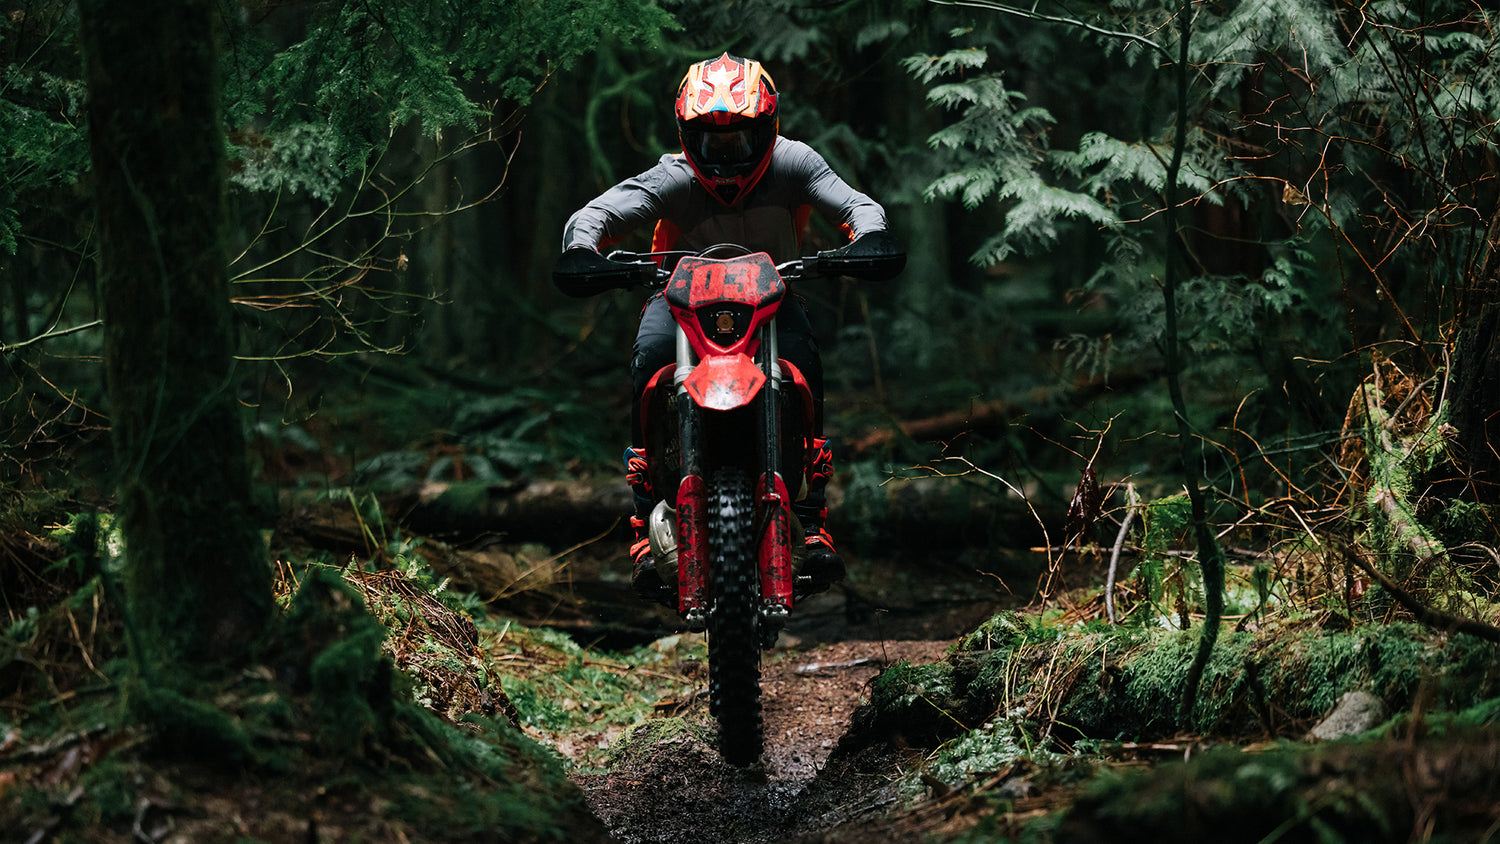 Motocross rider in the forest, wearing Scout SE gear